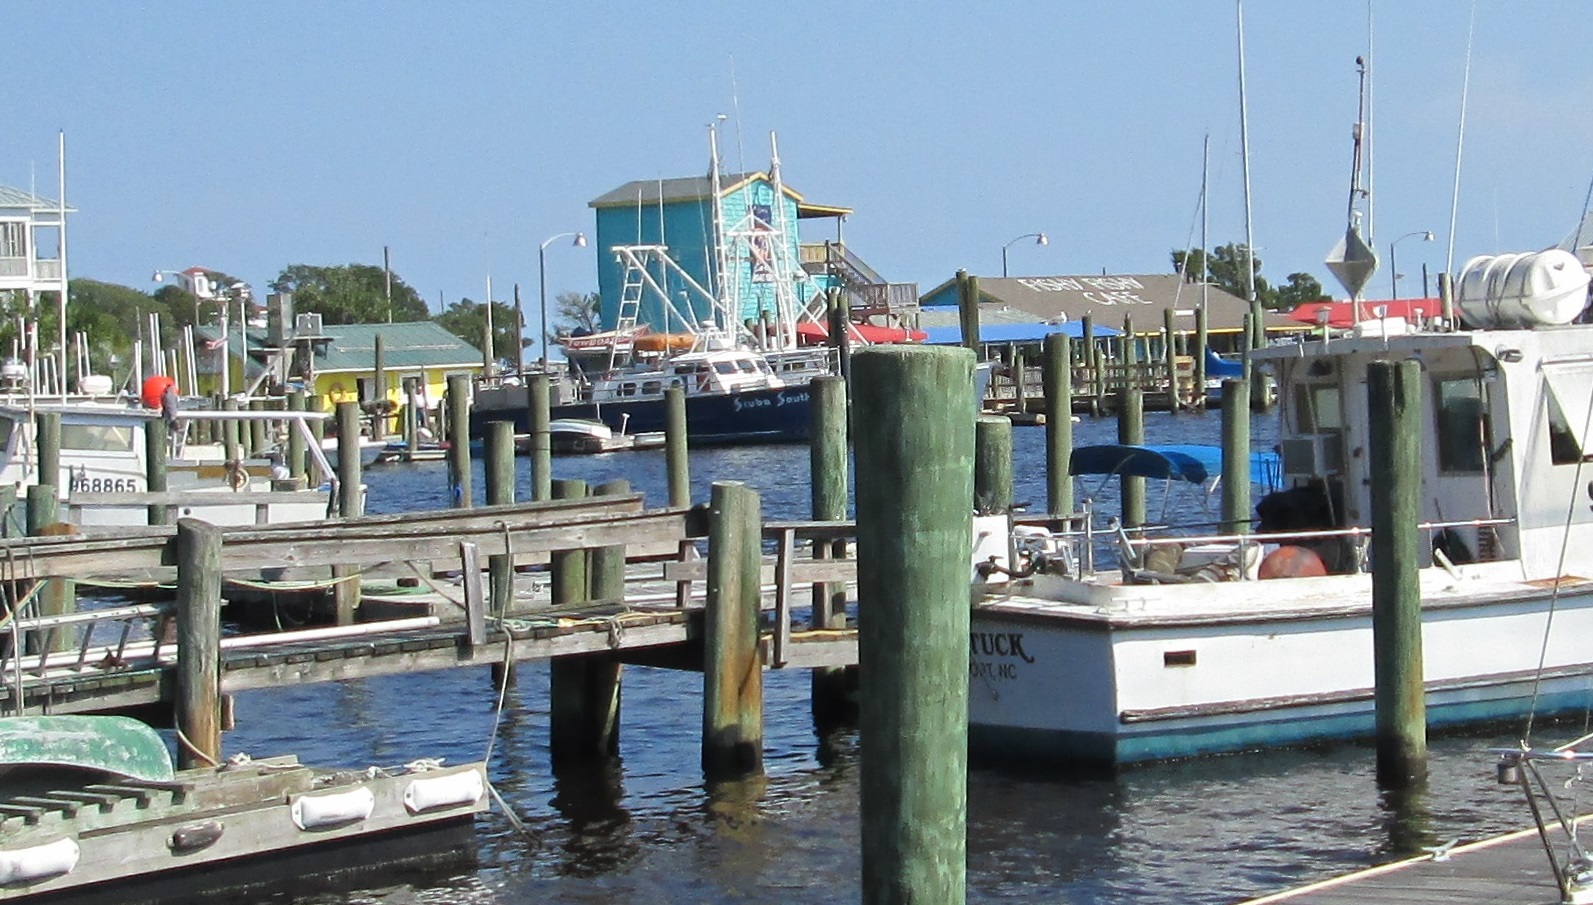 Old Yacht Basin area Southport NC